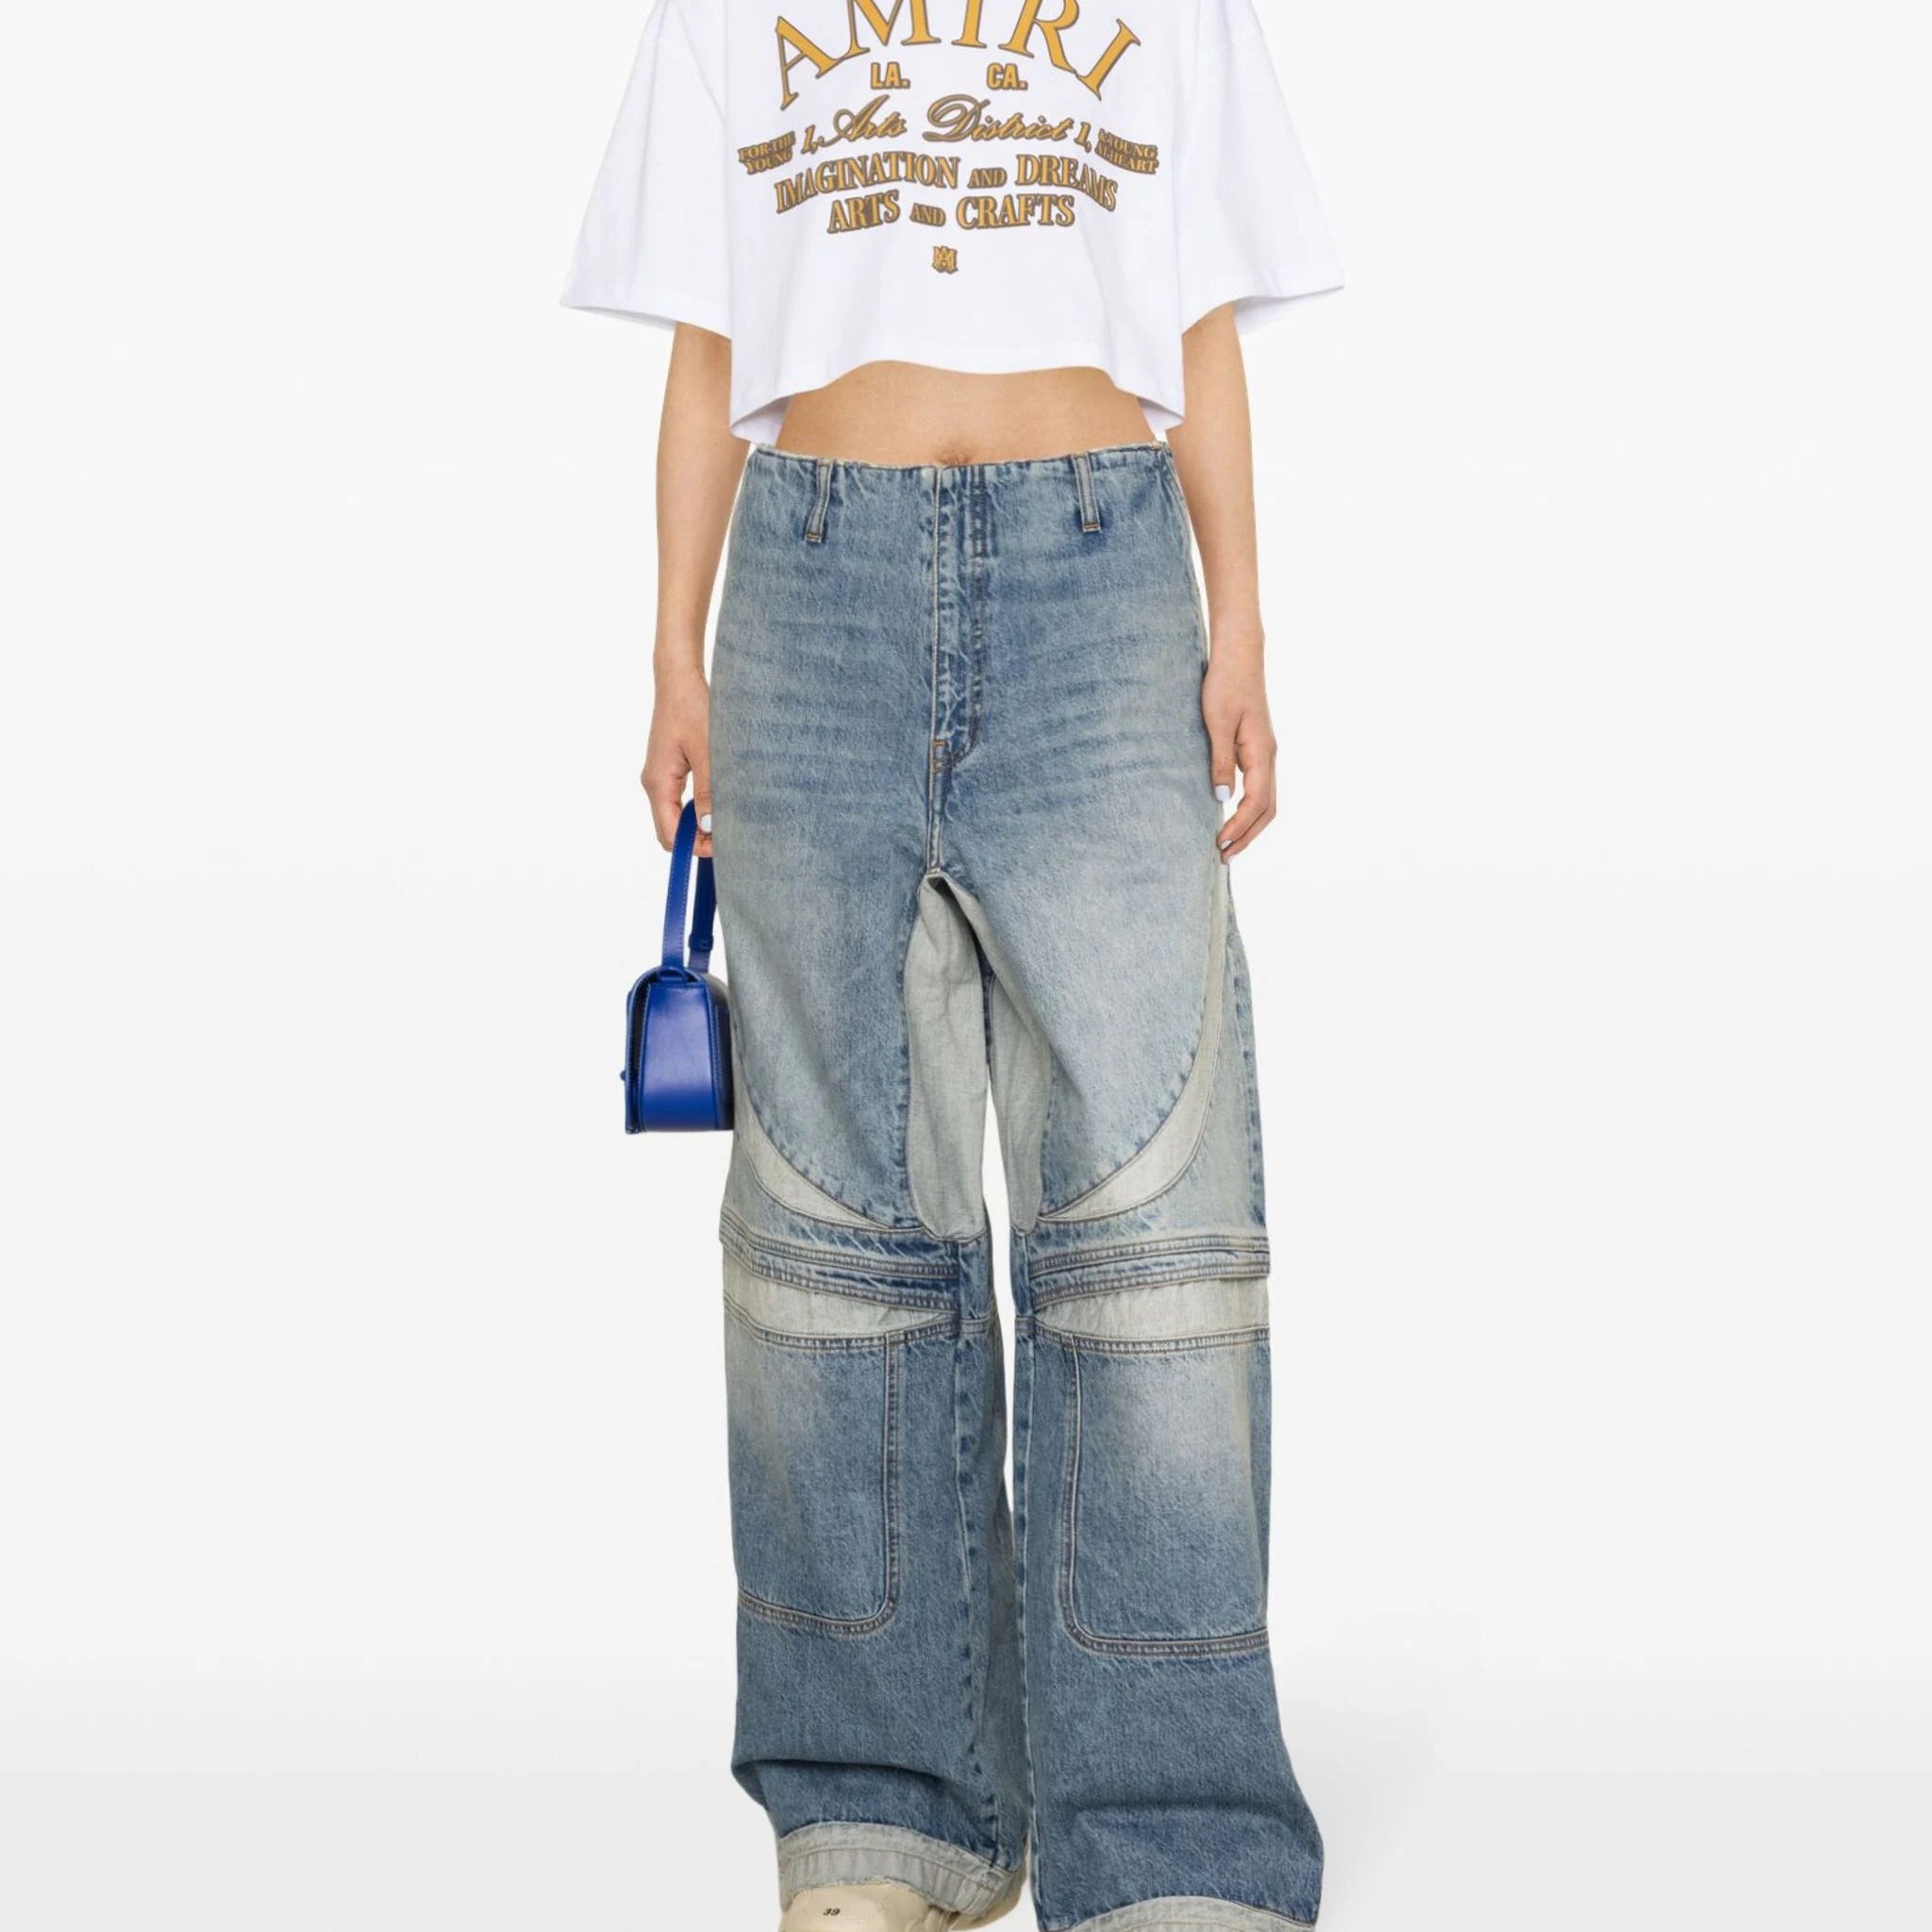 ARTS DISTRICT CROPPED TEE